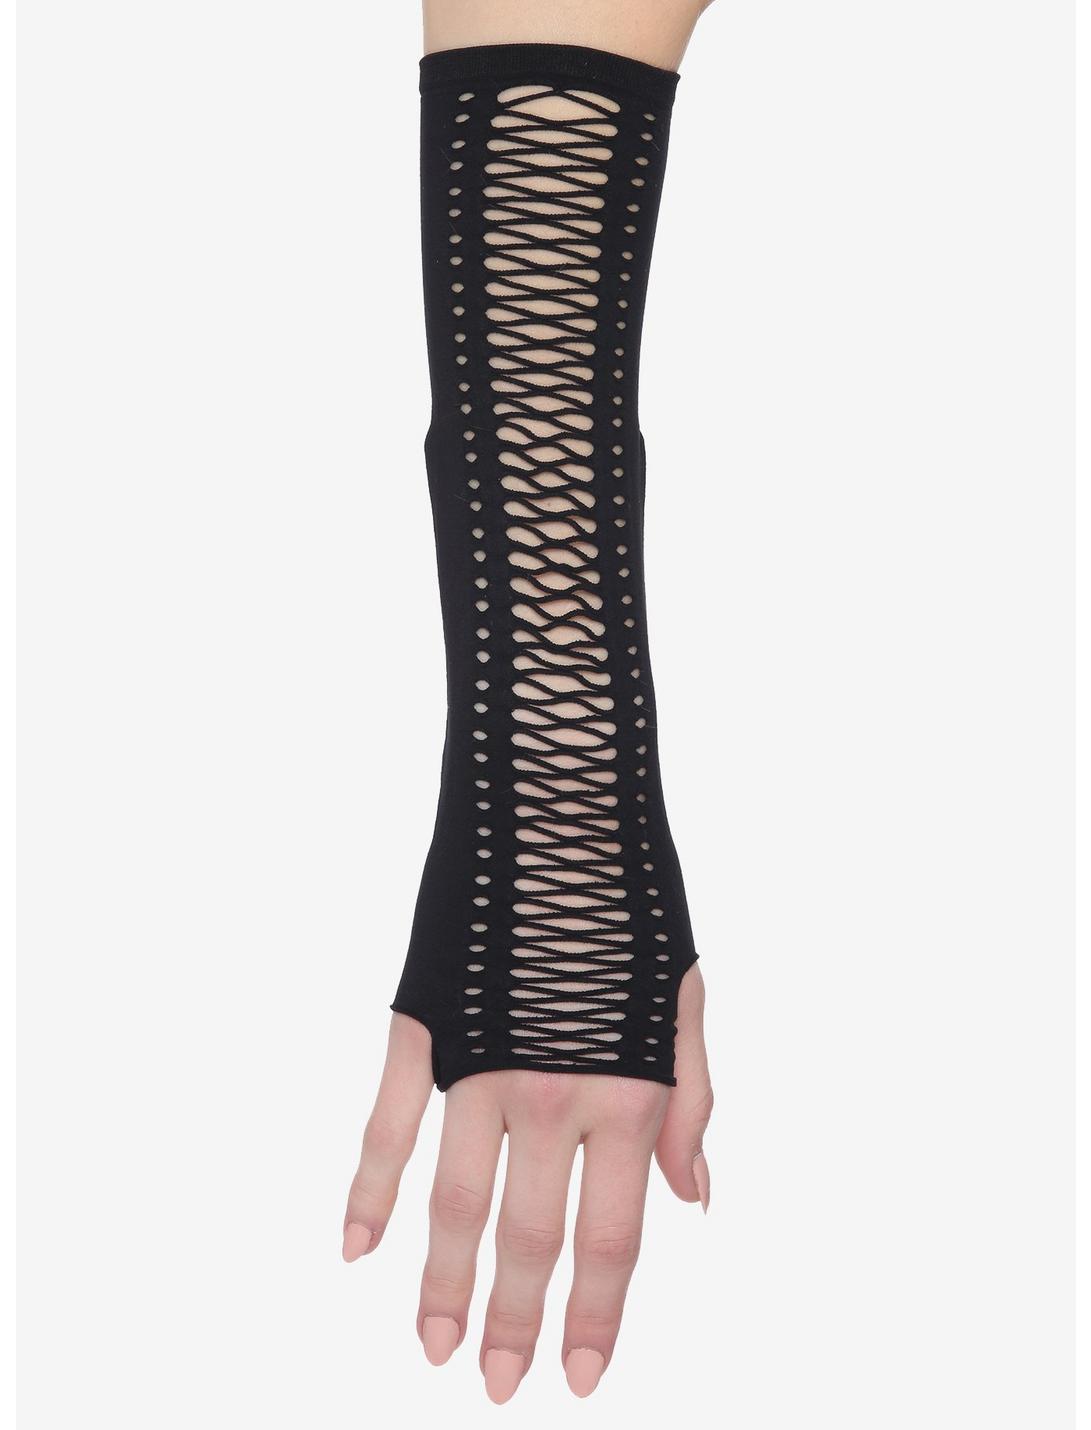 Black Lace-Up Arm Warmers, , hi-res